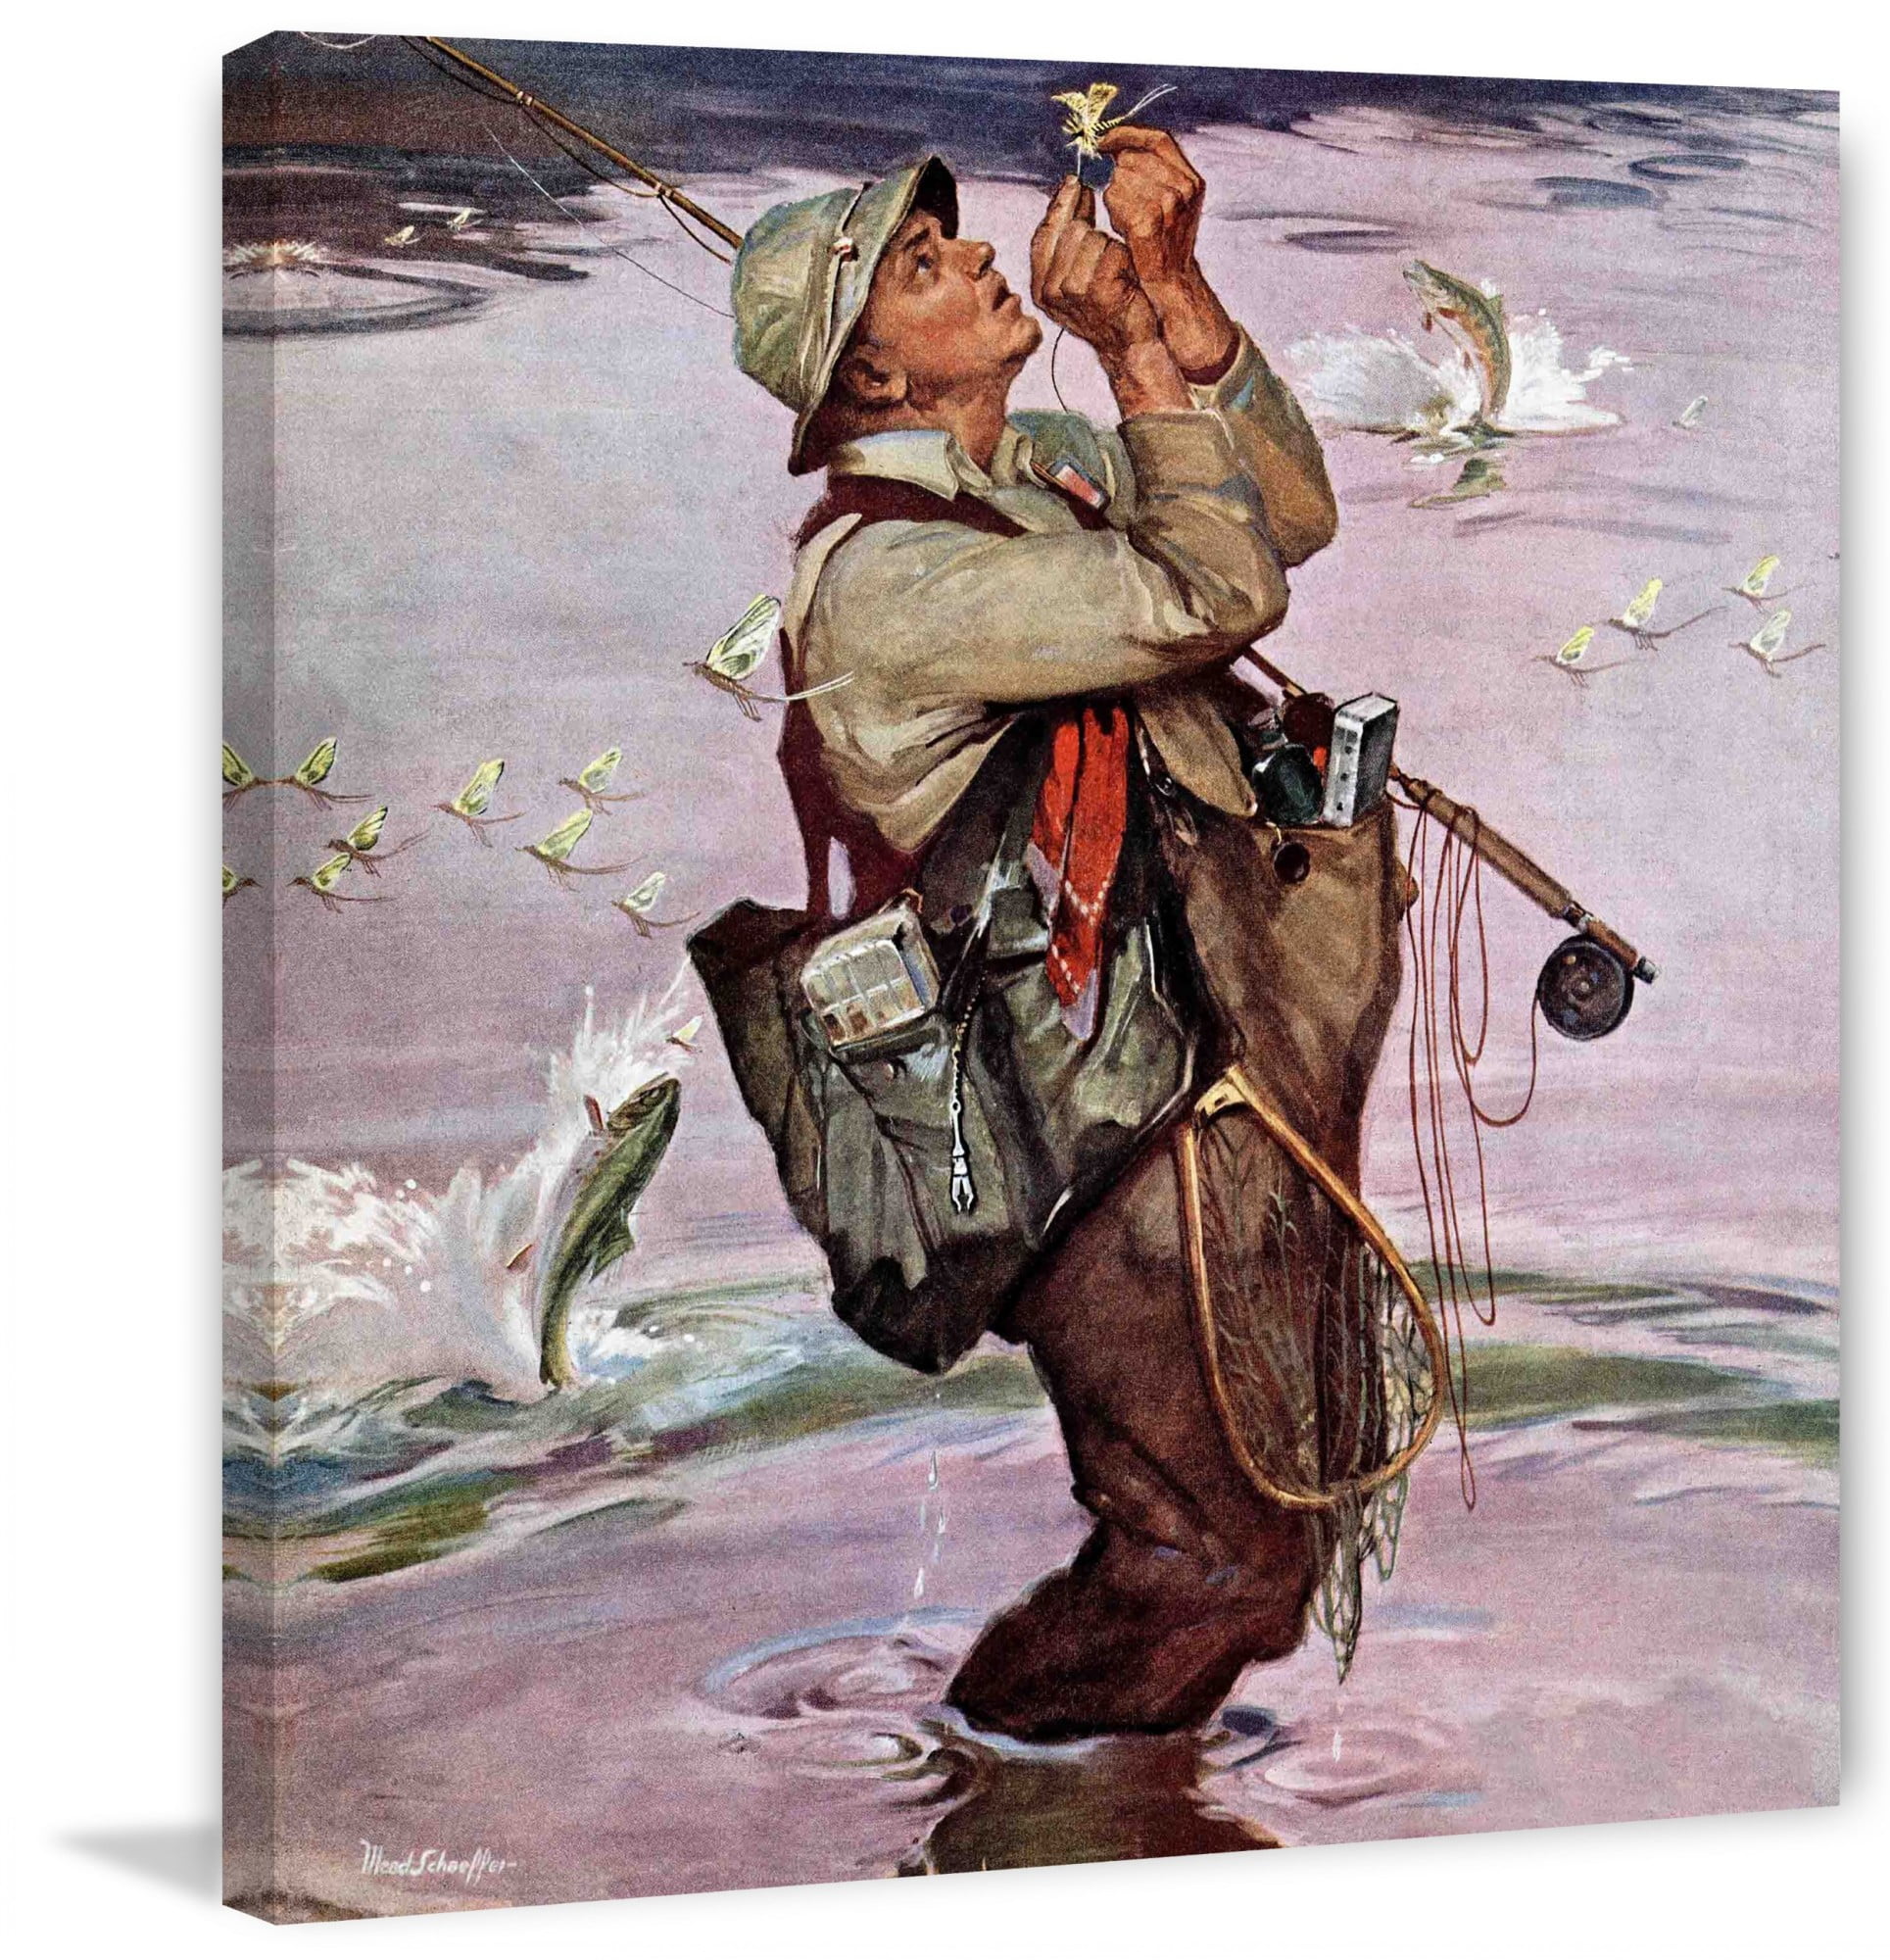 Man Fly Fishing On Big Hole River Landscape Wall Art Home Decor - POSTER  20x30